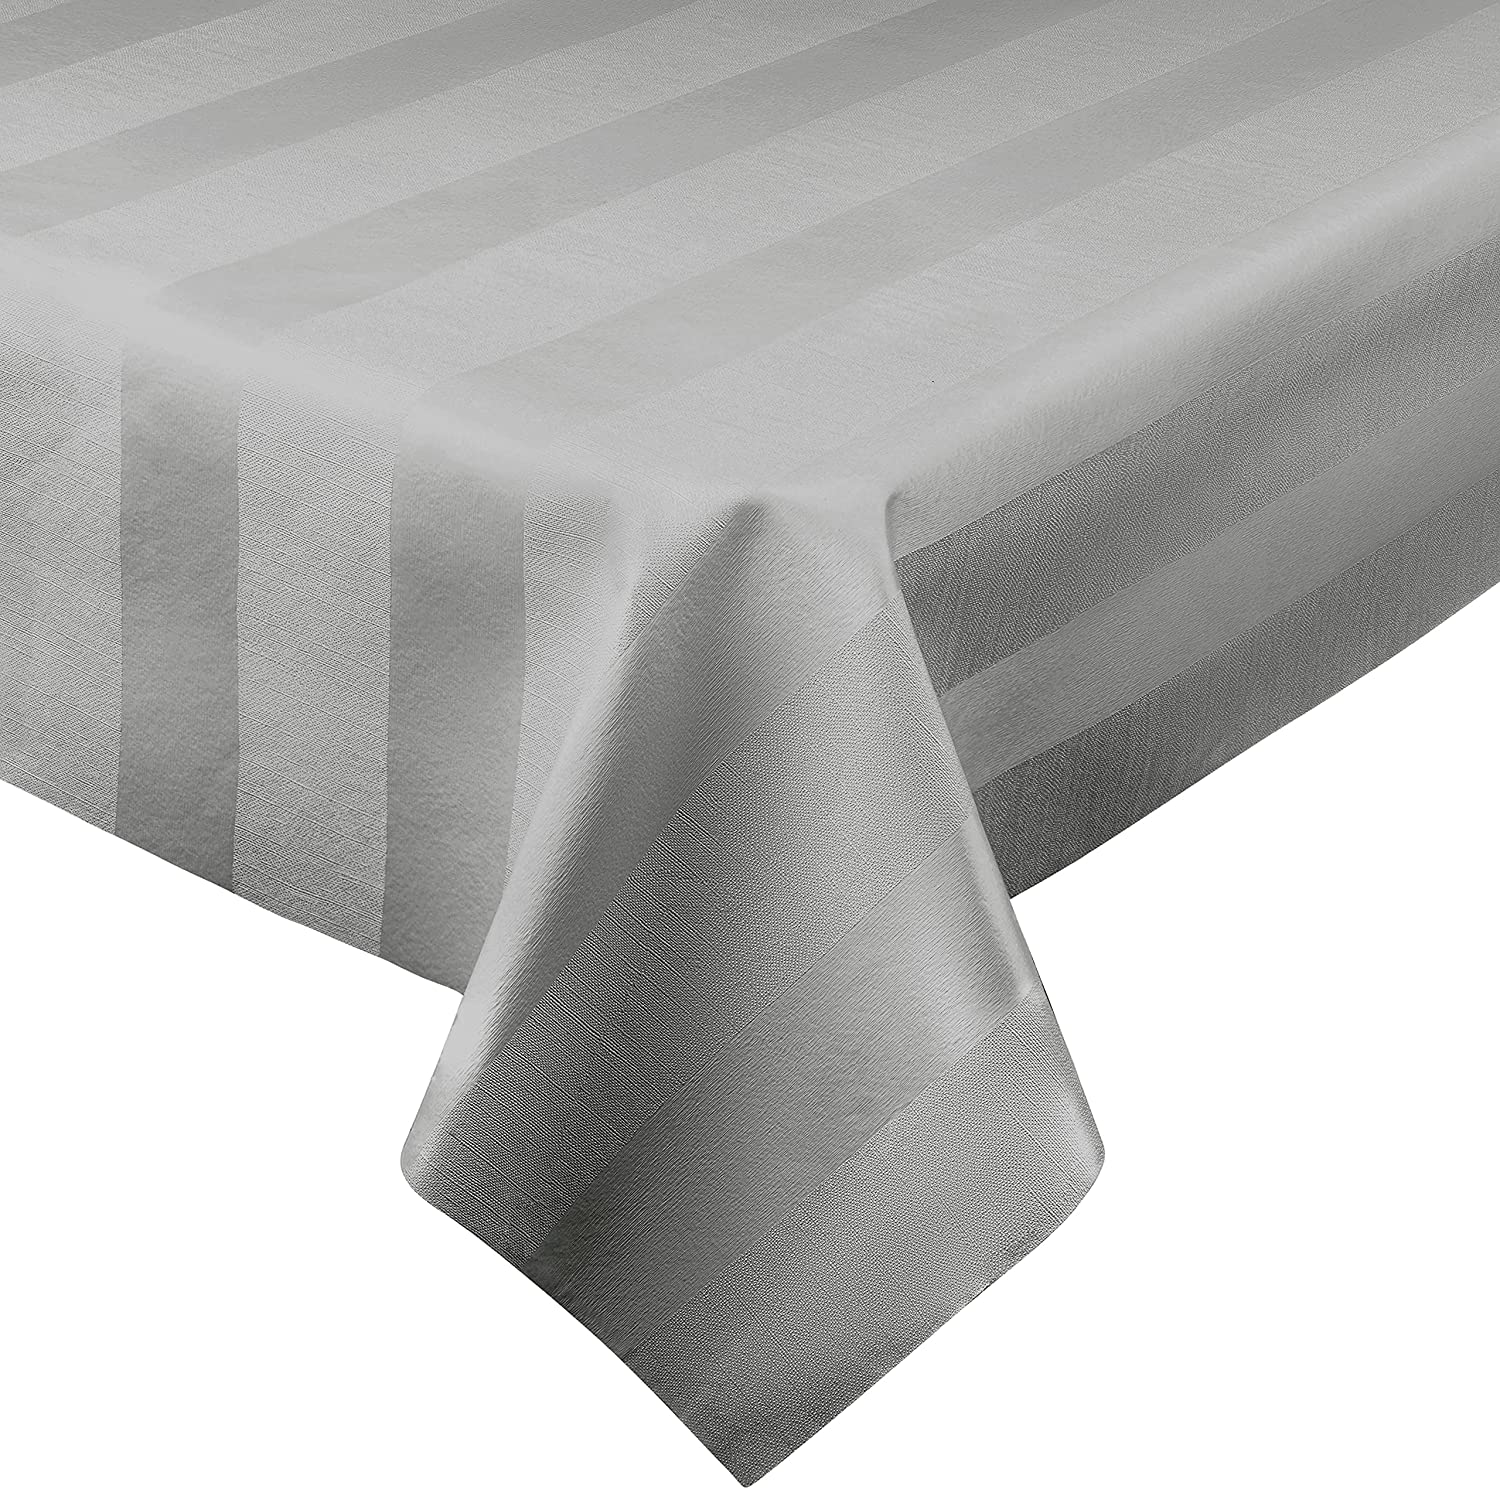 Luxury Table Protector Pad, 2 in 1 Table pad + Great Looking Tablecloth -  Heat Resistant, Spill & Stain Proof - Flannel Backing (54x72, Silver - Silk  Stripe) 